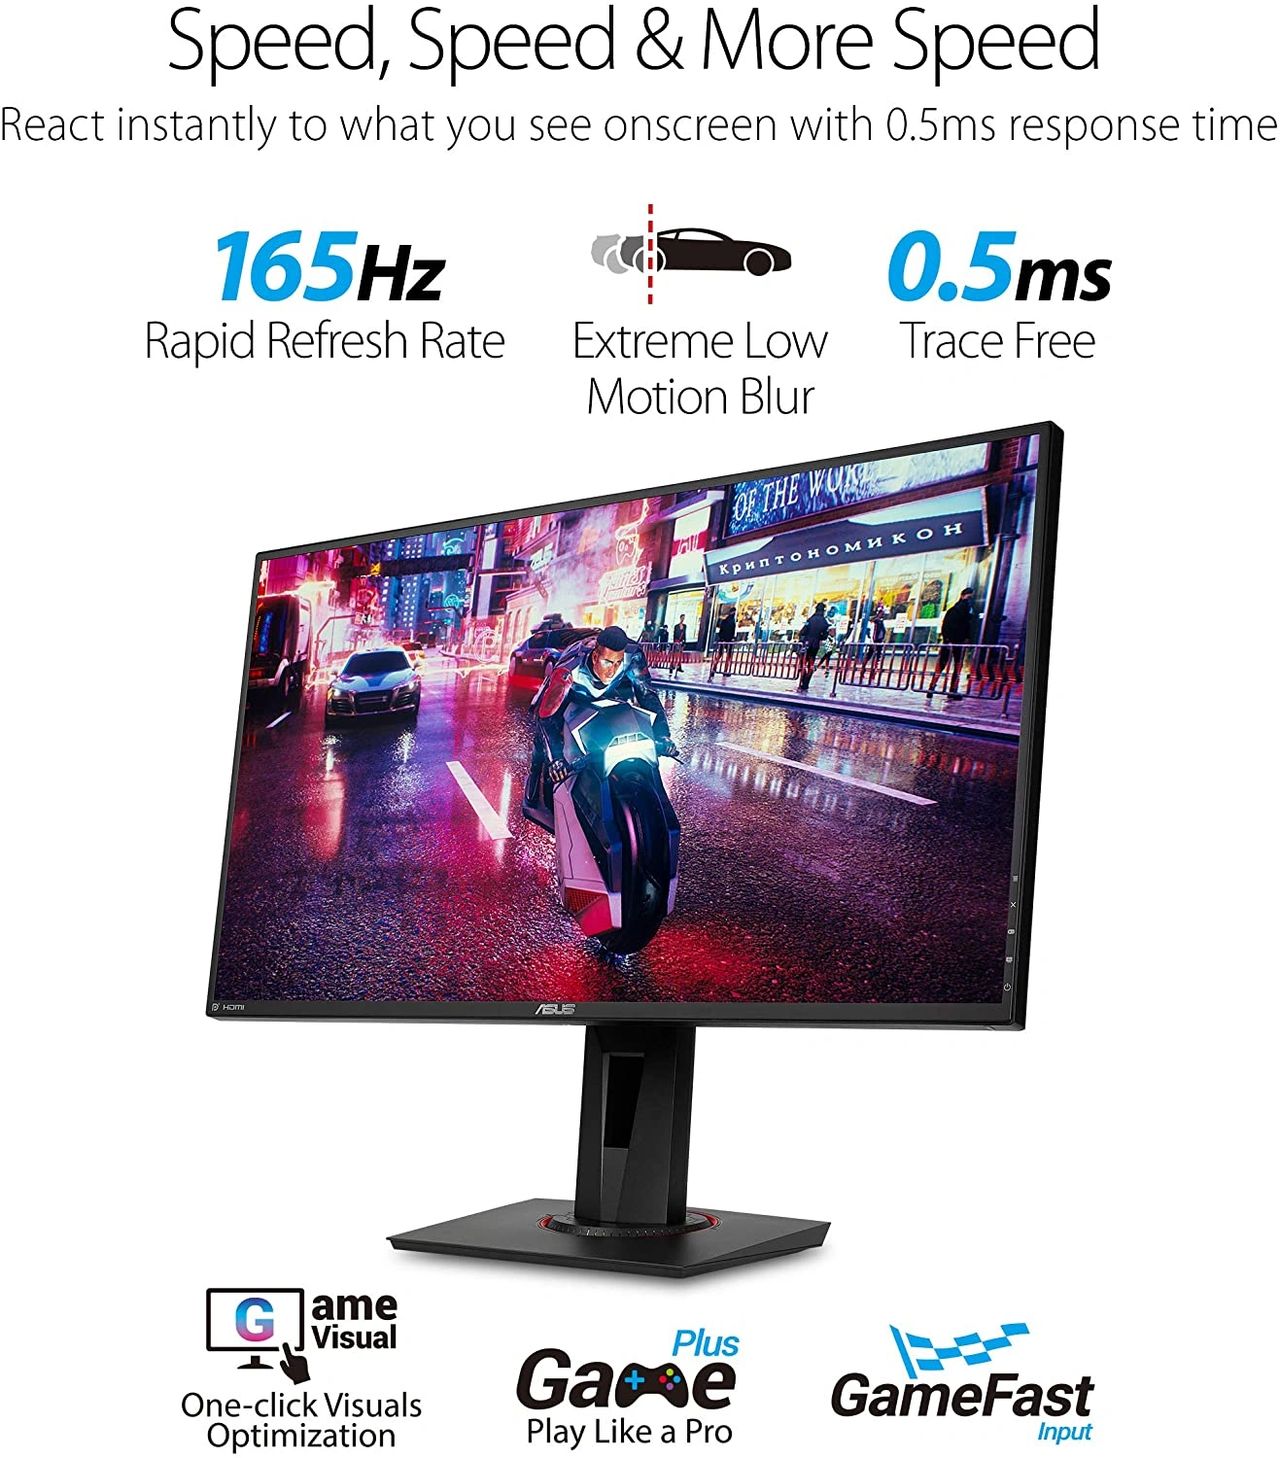 ASUS VG278QR 165Hz Monitor - Awesome 0.5ms Response Time!